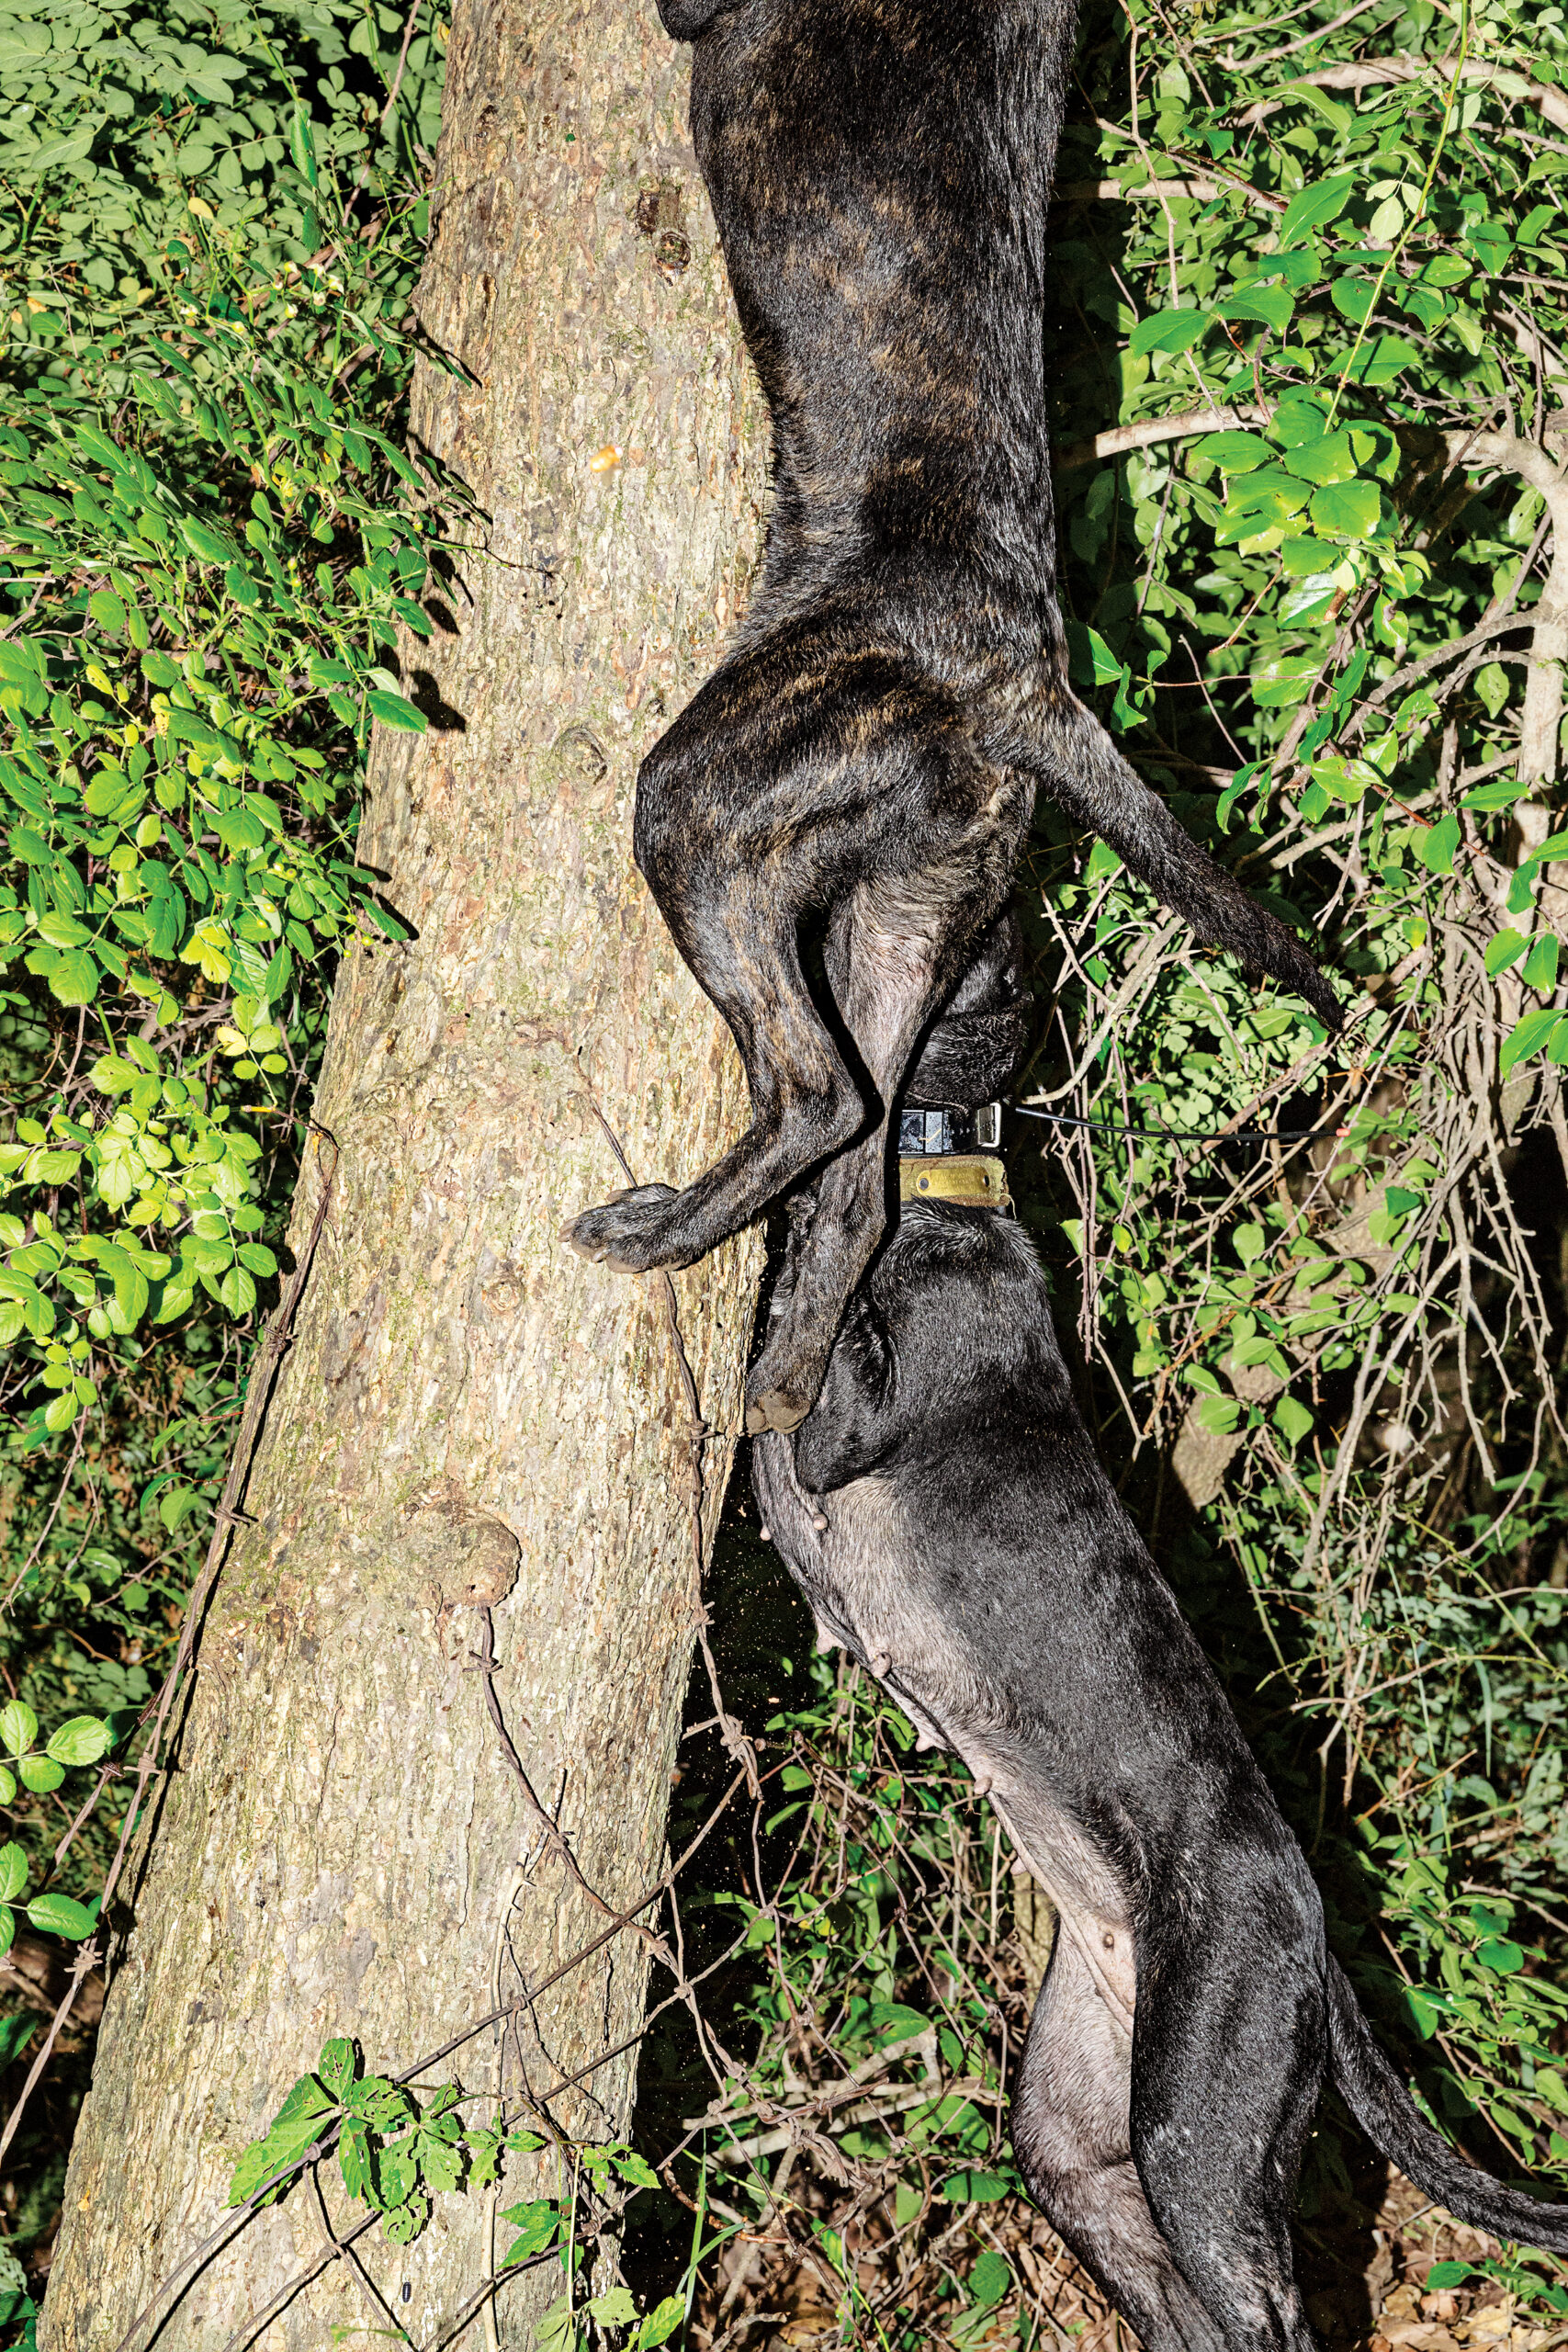 two dogs try to scale tree trunk